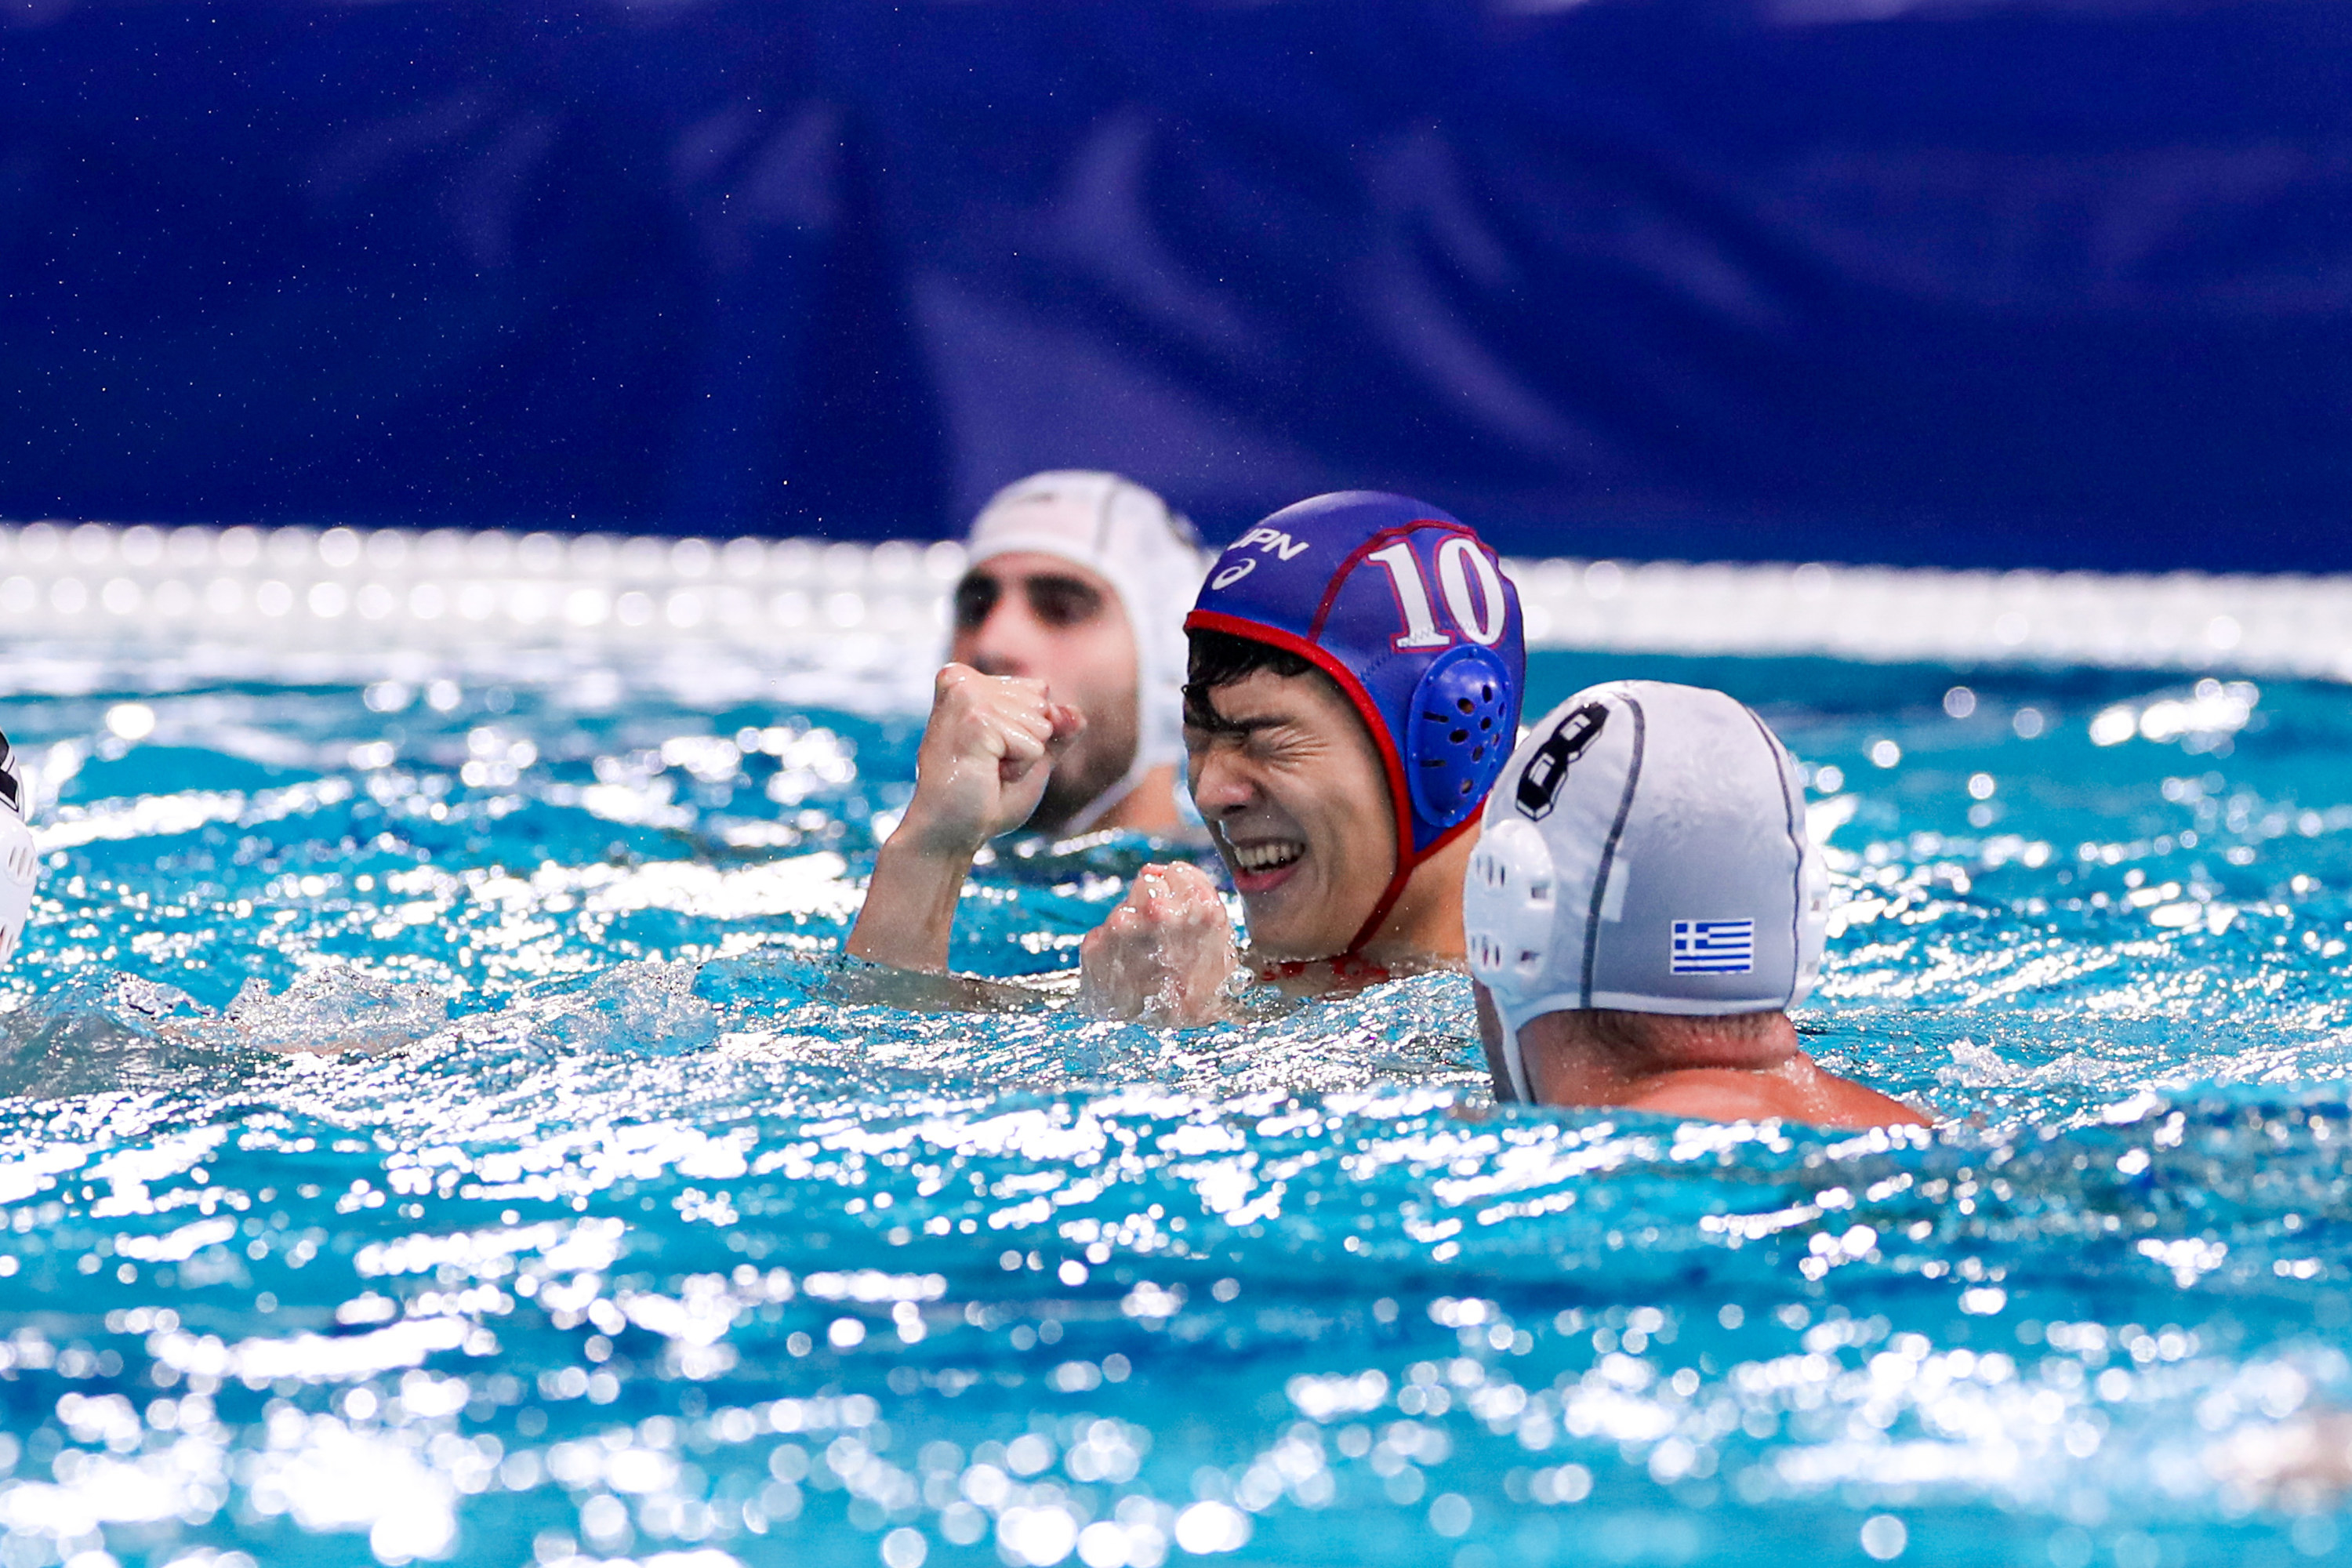 A water polo athlete celebrates with eyes closed and fists up in a pool